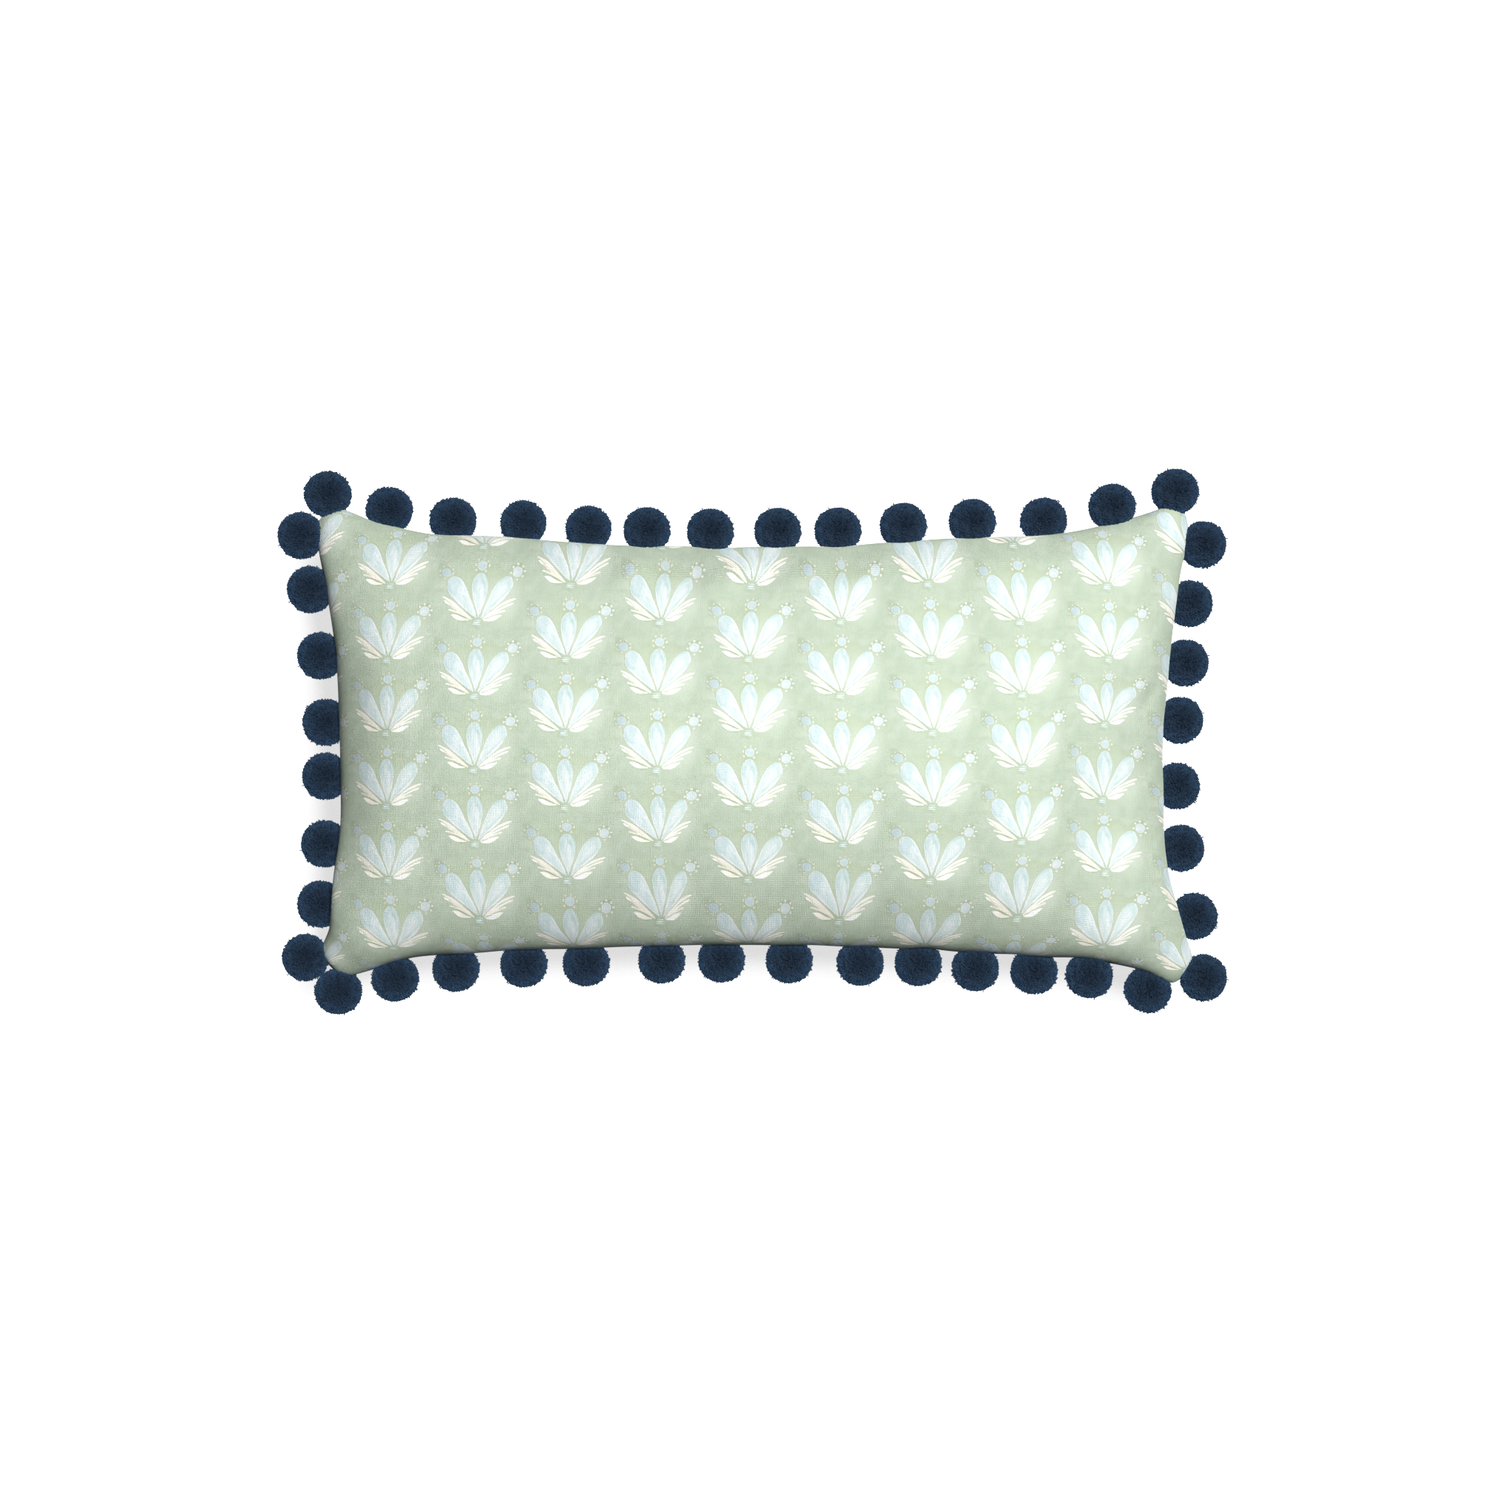 Petite-lumbar serena sea salt custom blue & green floral drop repeatpillow with c on white background